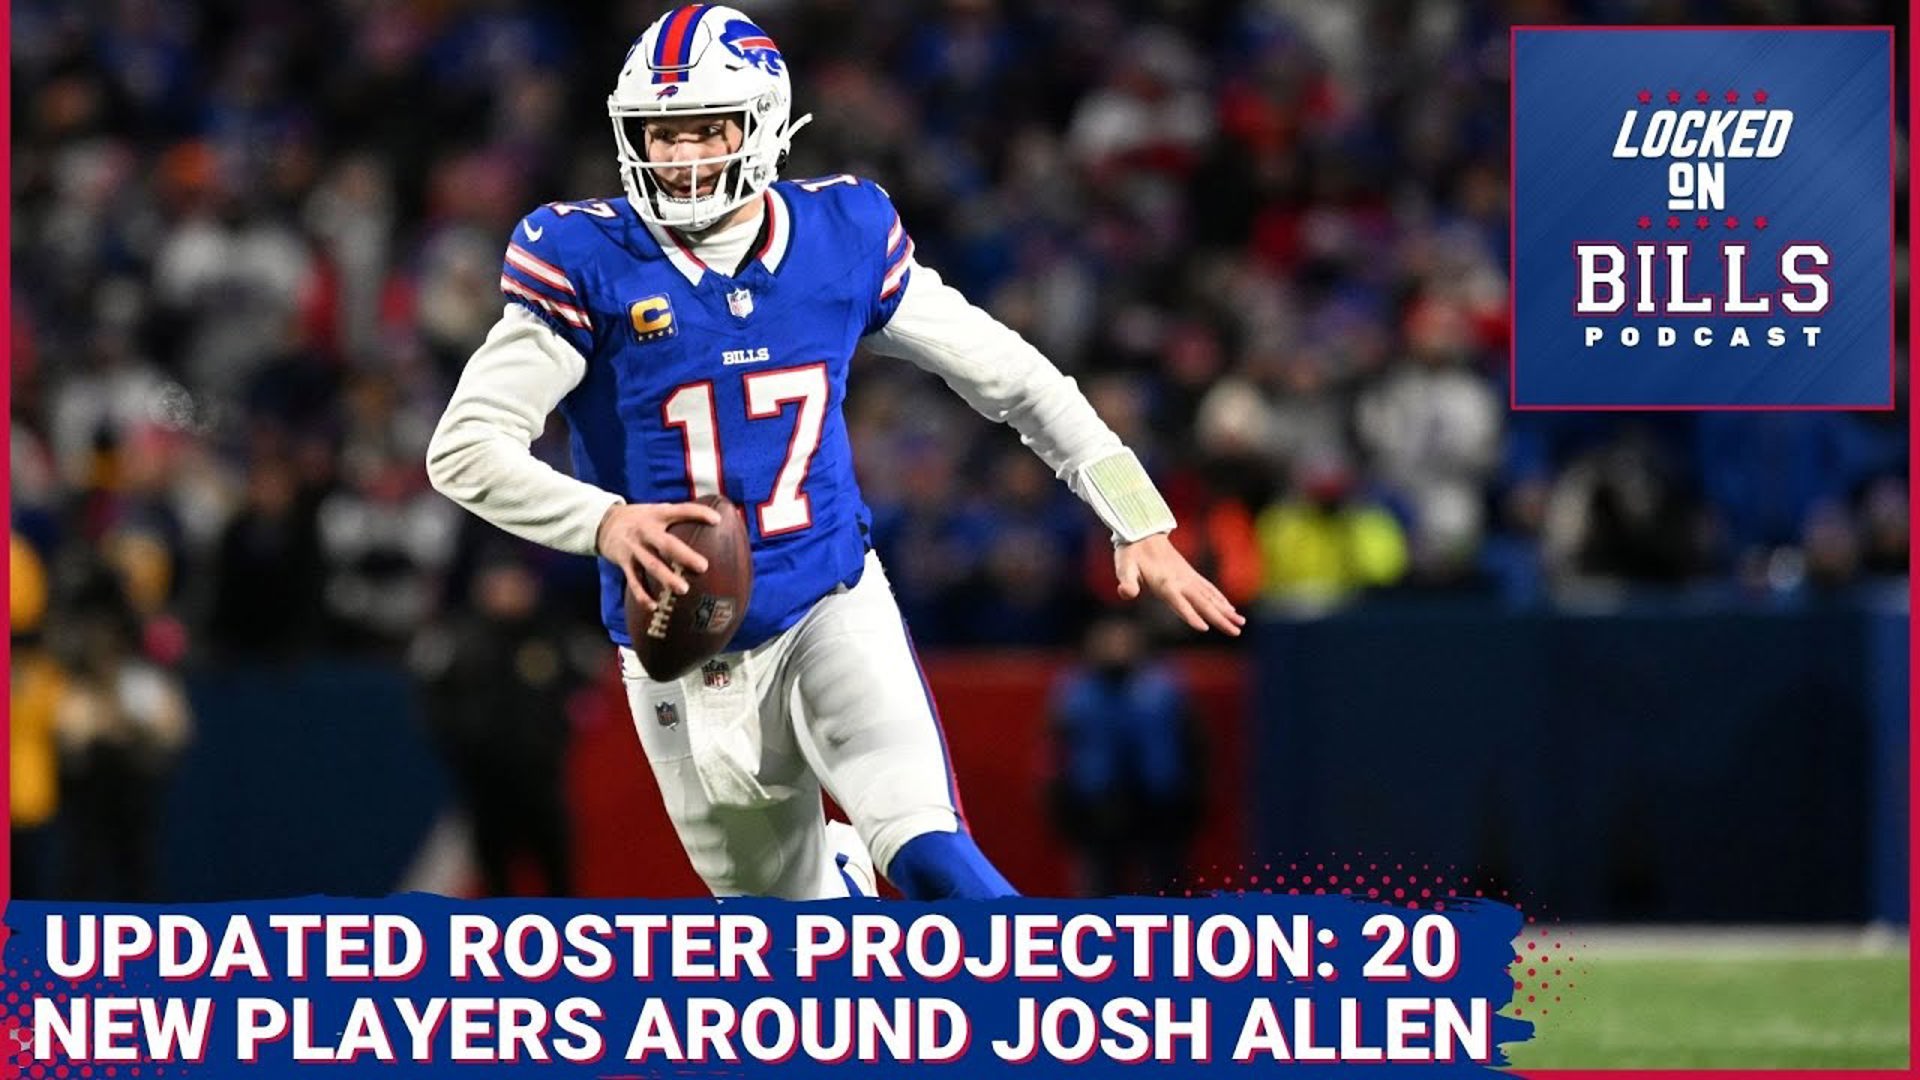 Post-Minicamp Buffalo Bills roster projection. Examining the roster bubble & training camp battles